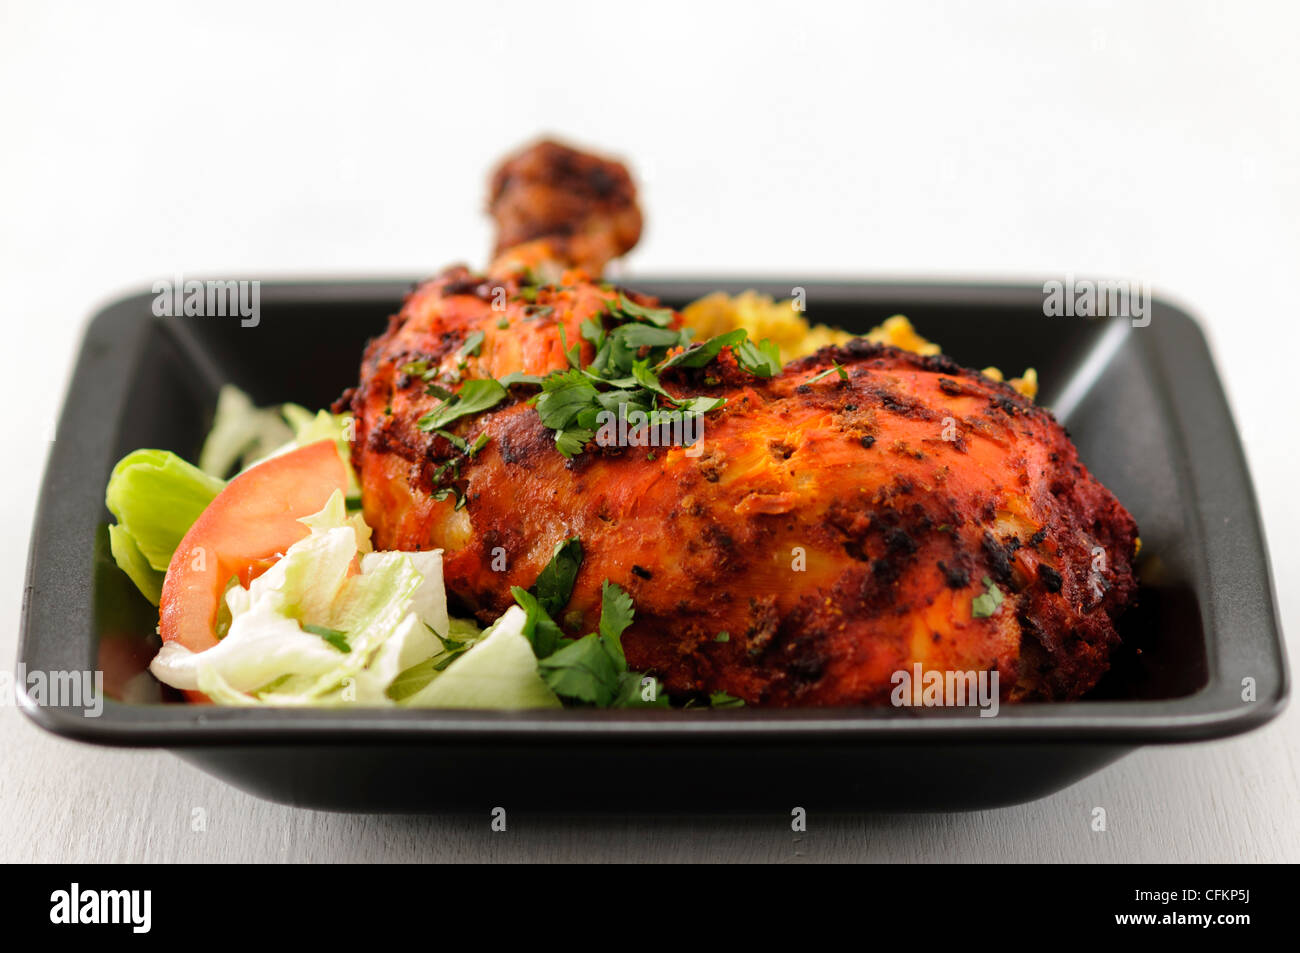 Meal of tandoori chicken leg with saffron rice and salad on black plate garnished with chopped coriander Stock Photo